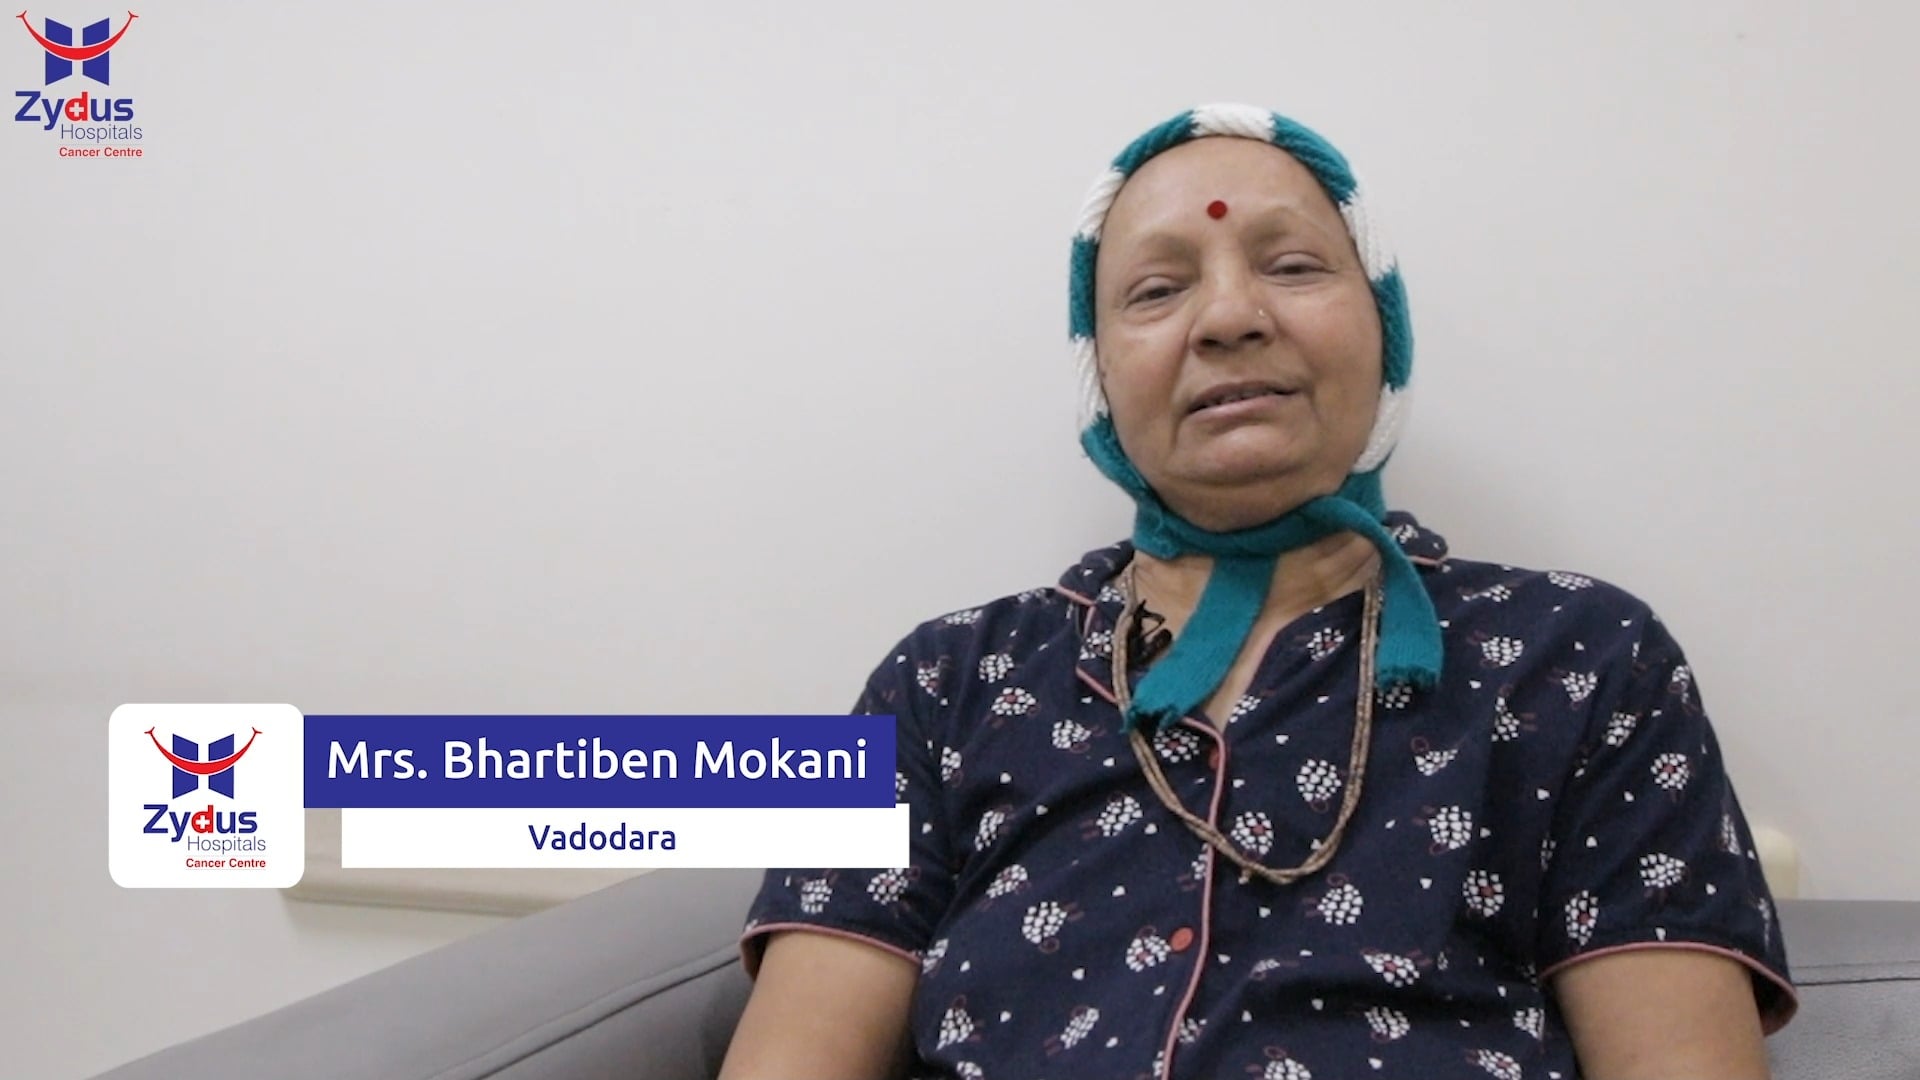 The stories of recovery give strength to the strugglers fighting with cancer; sharing a glimpse of the brave cancer fighter Mrs. Bhartiben Mokani who underwent breast cancer treatment.

She toiled, she struggled but she didn't give up!
Her words of appreciation, for Zydus Cancer Centre and for the experts really make us delighted.

We have witnessed her journey so closely with a lot of care and empathy. We are glad that we could give her the gift of recovery & life with compassionate care.
Wishing her a hale & hearty life ahead.

We also recommend every viewer to draw inspiration from the elderly lady and make no delay in seeking your treatment.

#ZydusCancerCentre #CancerHospital #BreastCancer #CancerCare #CancerCentre #CancerTherapy #CancerTreatment #CancerousDiseases #BeatCancer #CancerAwareness #CancerDoctors #HealthCare #StayHealthy #ZydusCare #ZydusHospitals #BestHospitalinAhmedabad #Ahmedabad #GoodHealth  #BreastCancerAwareness #BreastCancerSurvivor